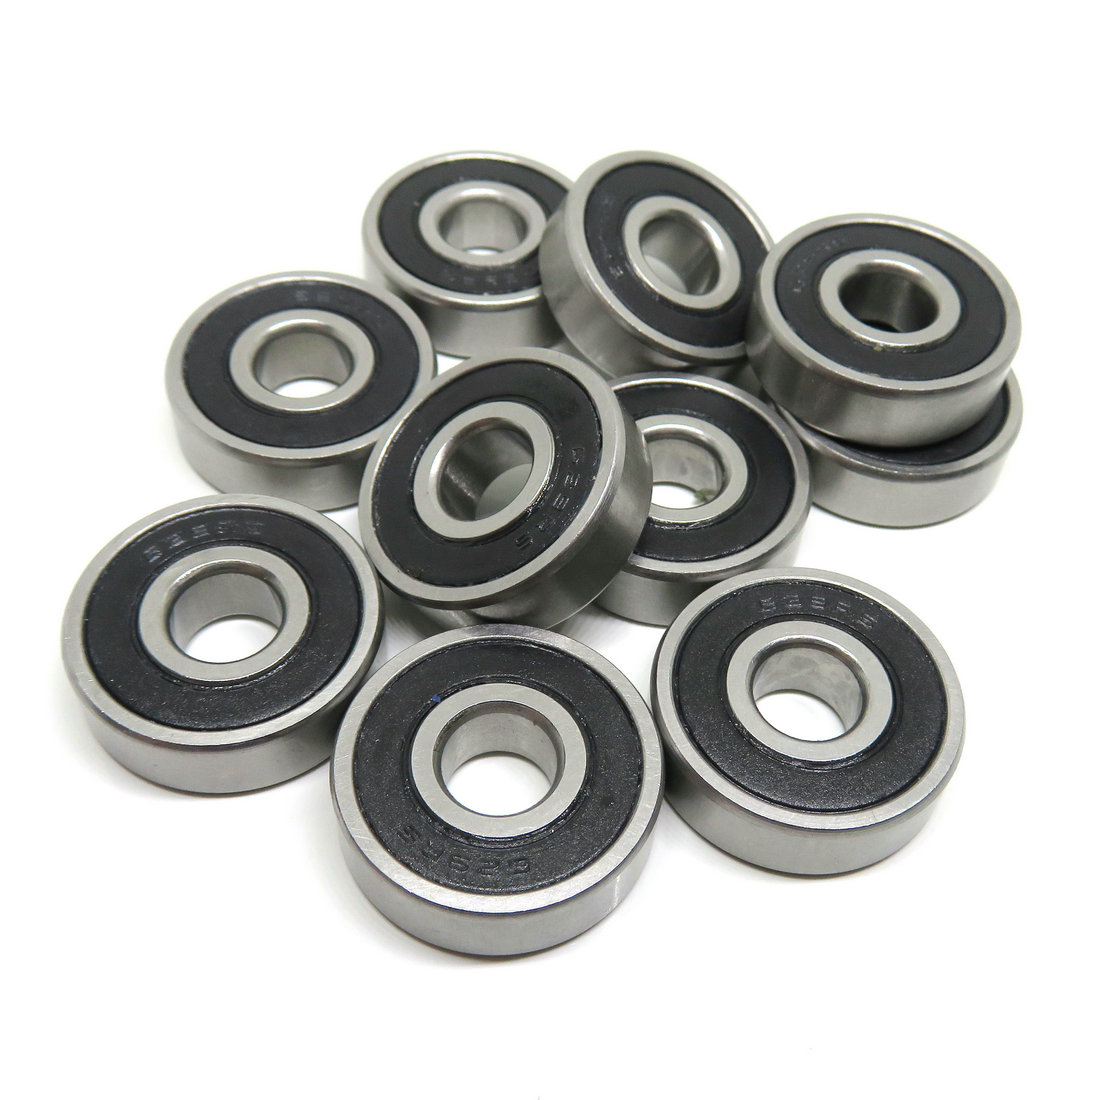 629RS Bearing ABEC-5 9*26*8 mm Miniature Sealed 629-2RS Ball Bearings 629 2RS For Electric Motor.jpg